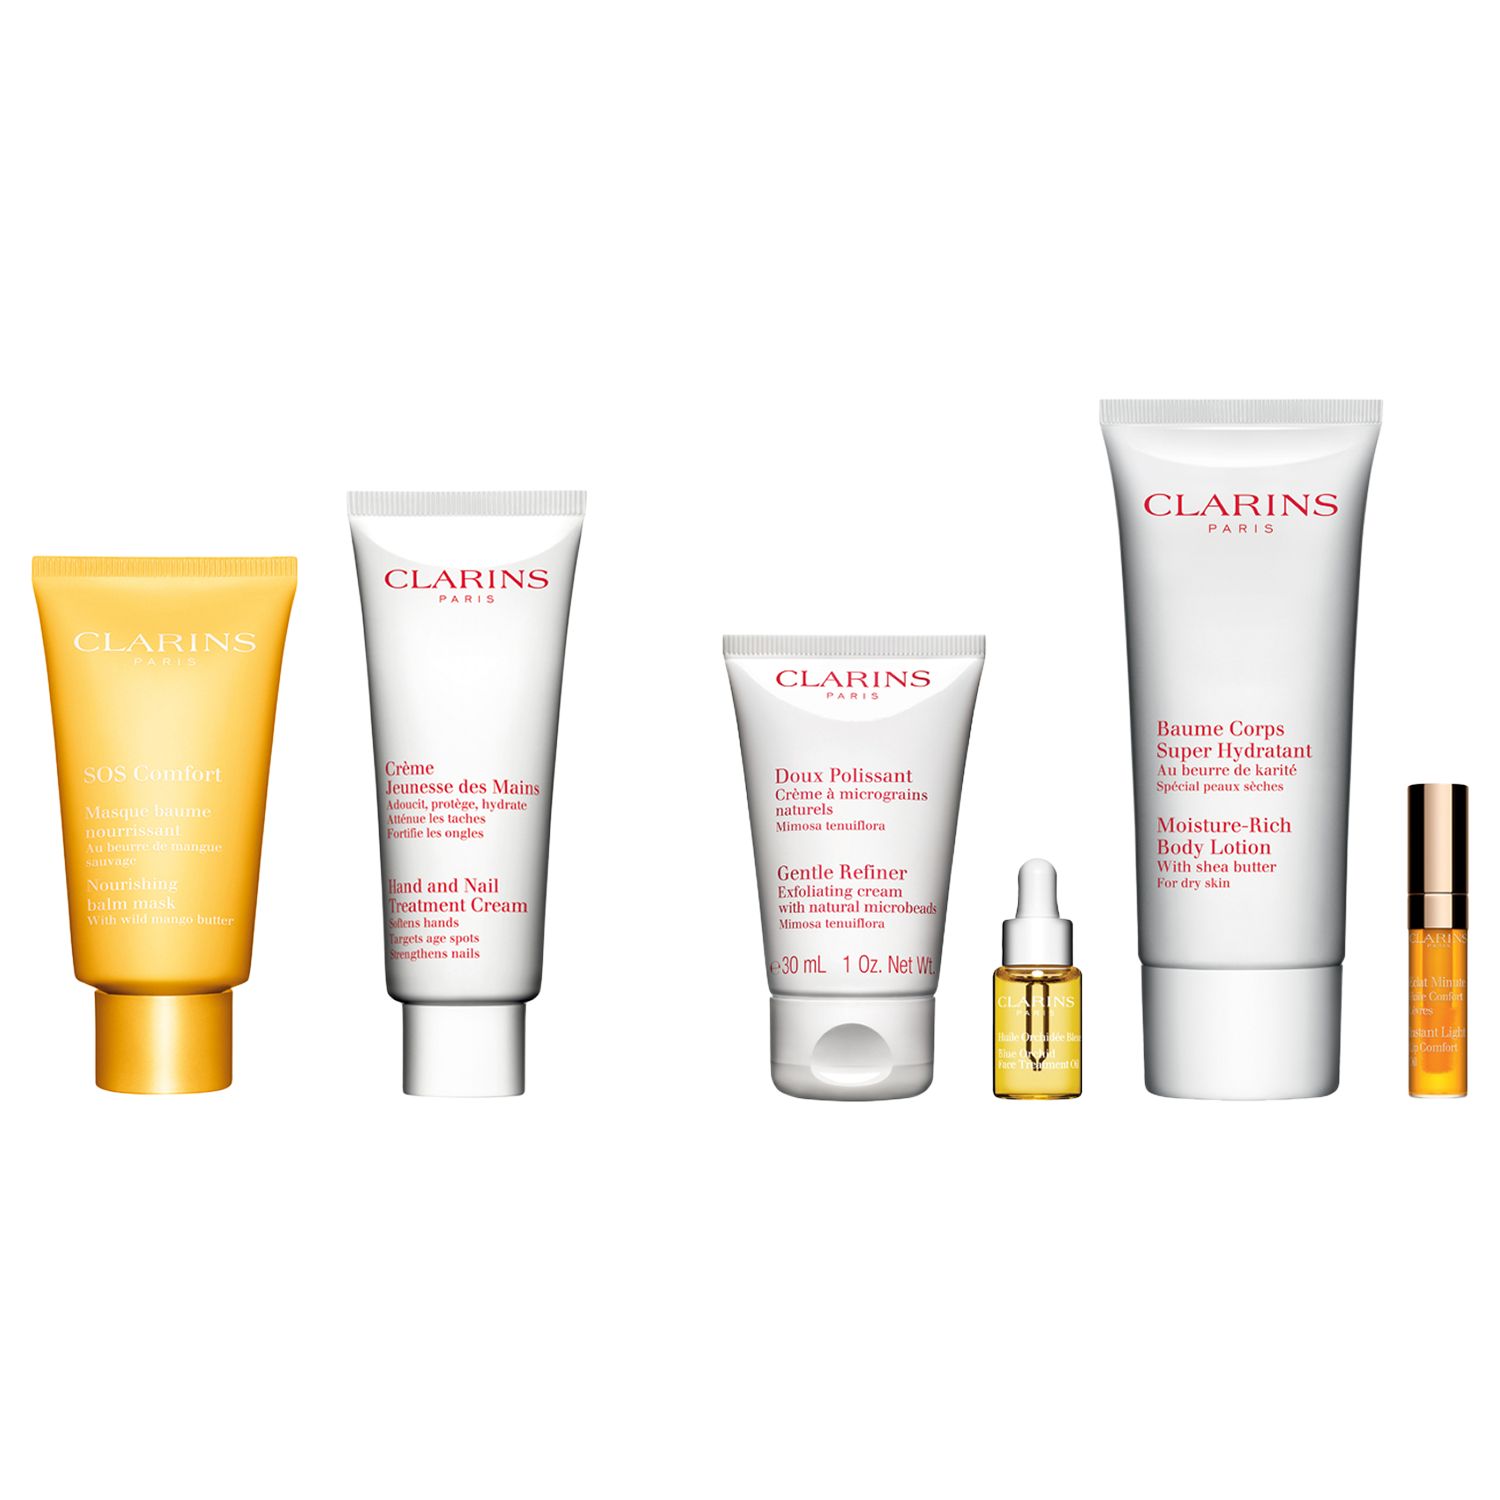 Clarins SOS Comfort Nourishing Balm Mask and Hand and Nail Treatment Cream with Gift (Bundle)